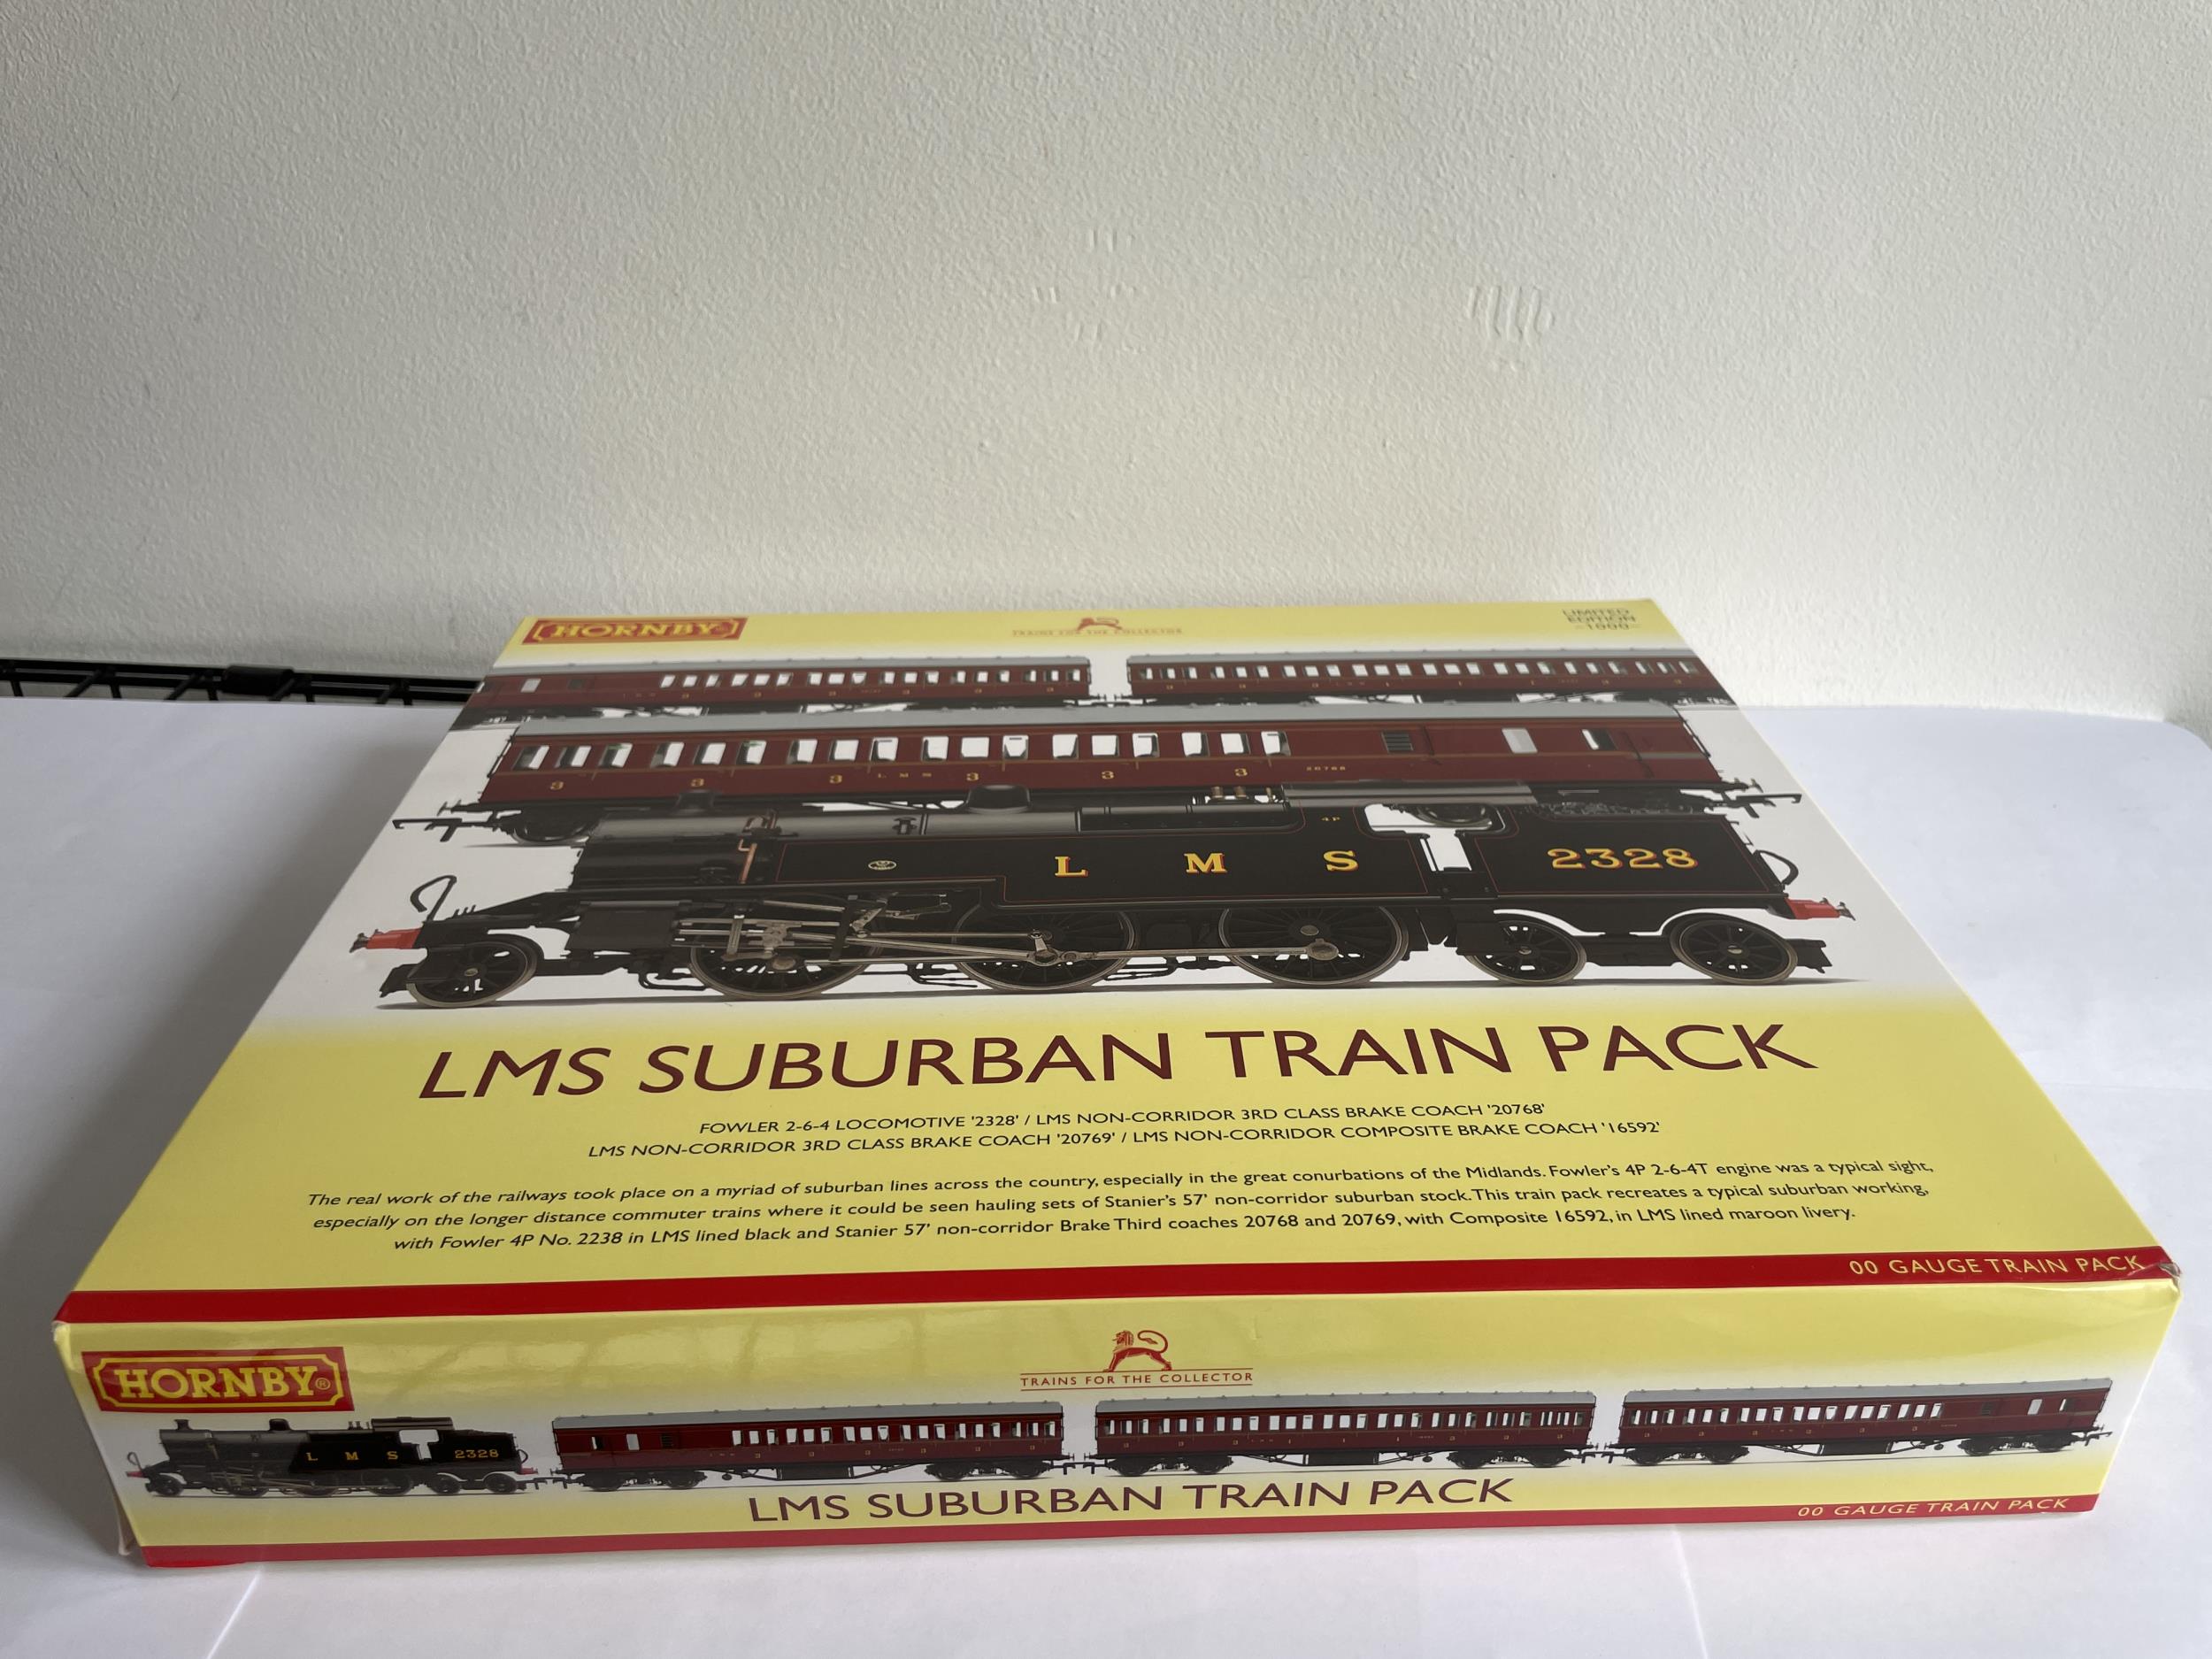 A HORNBY LIMITED EDITION OF 1000 AS NEW AND UNUSED BOXED LMS SUBURBAN TRAIN PACK 00 GAUGE - Image 2 of 3